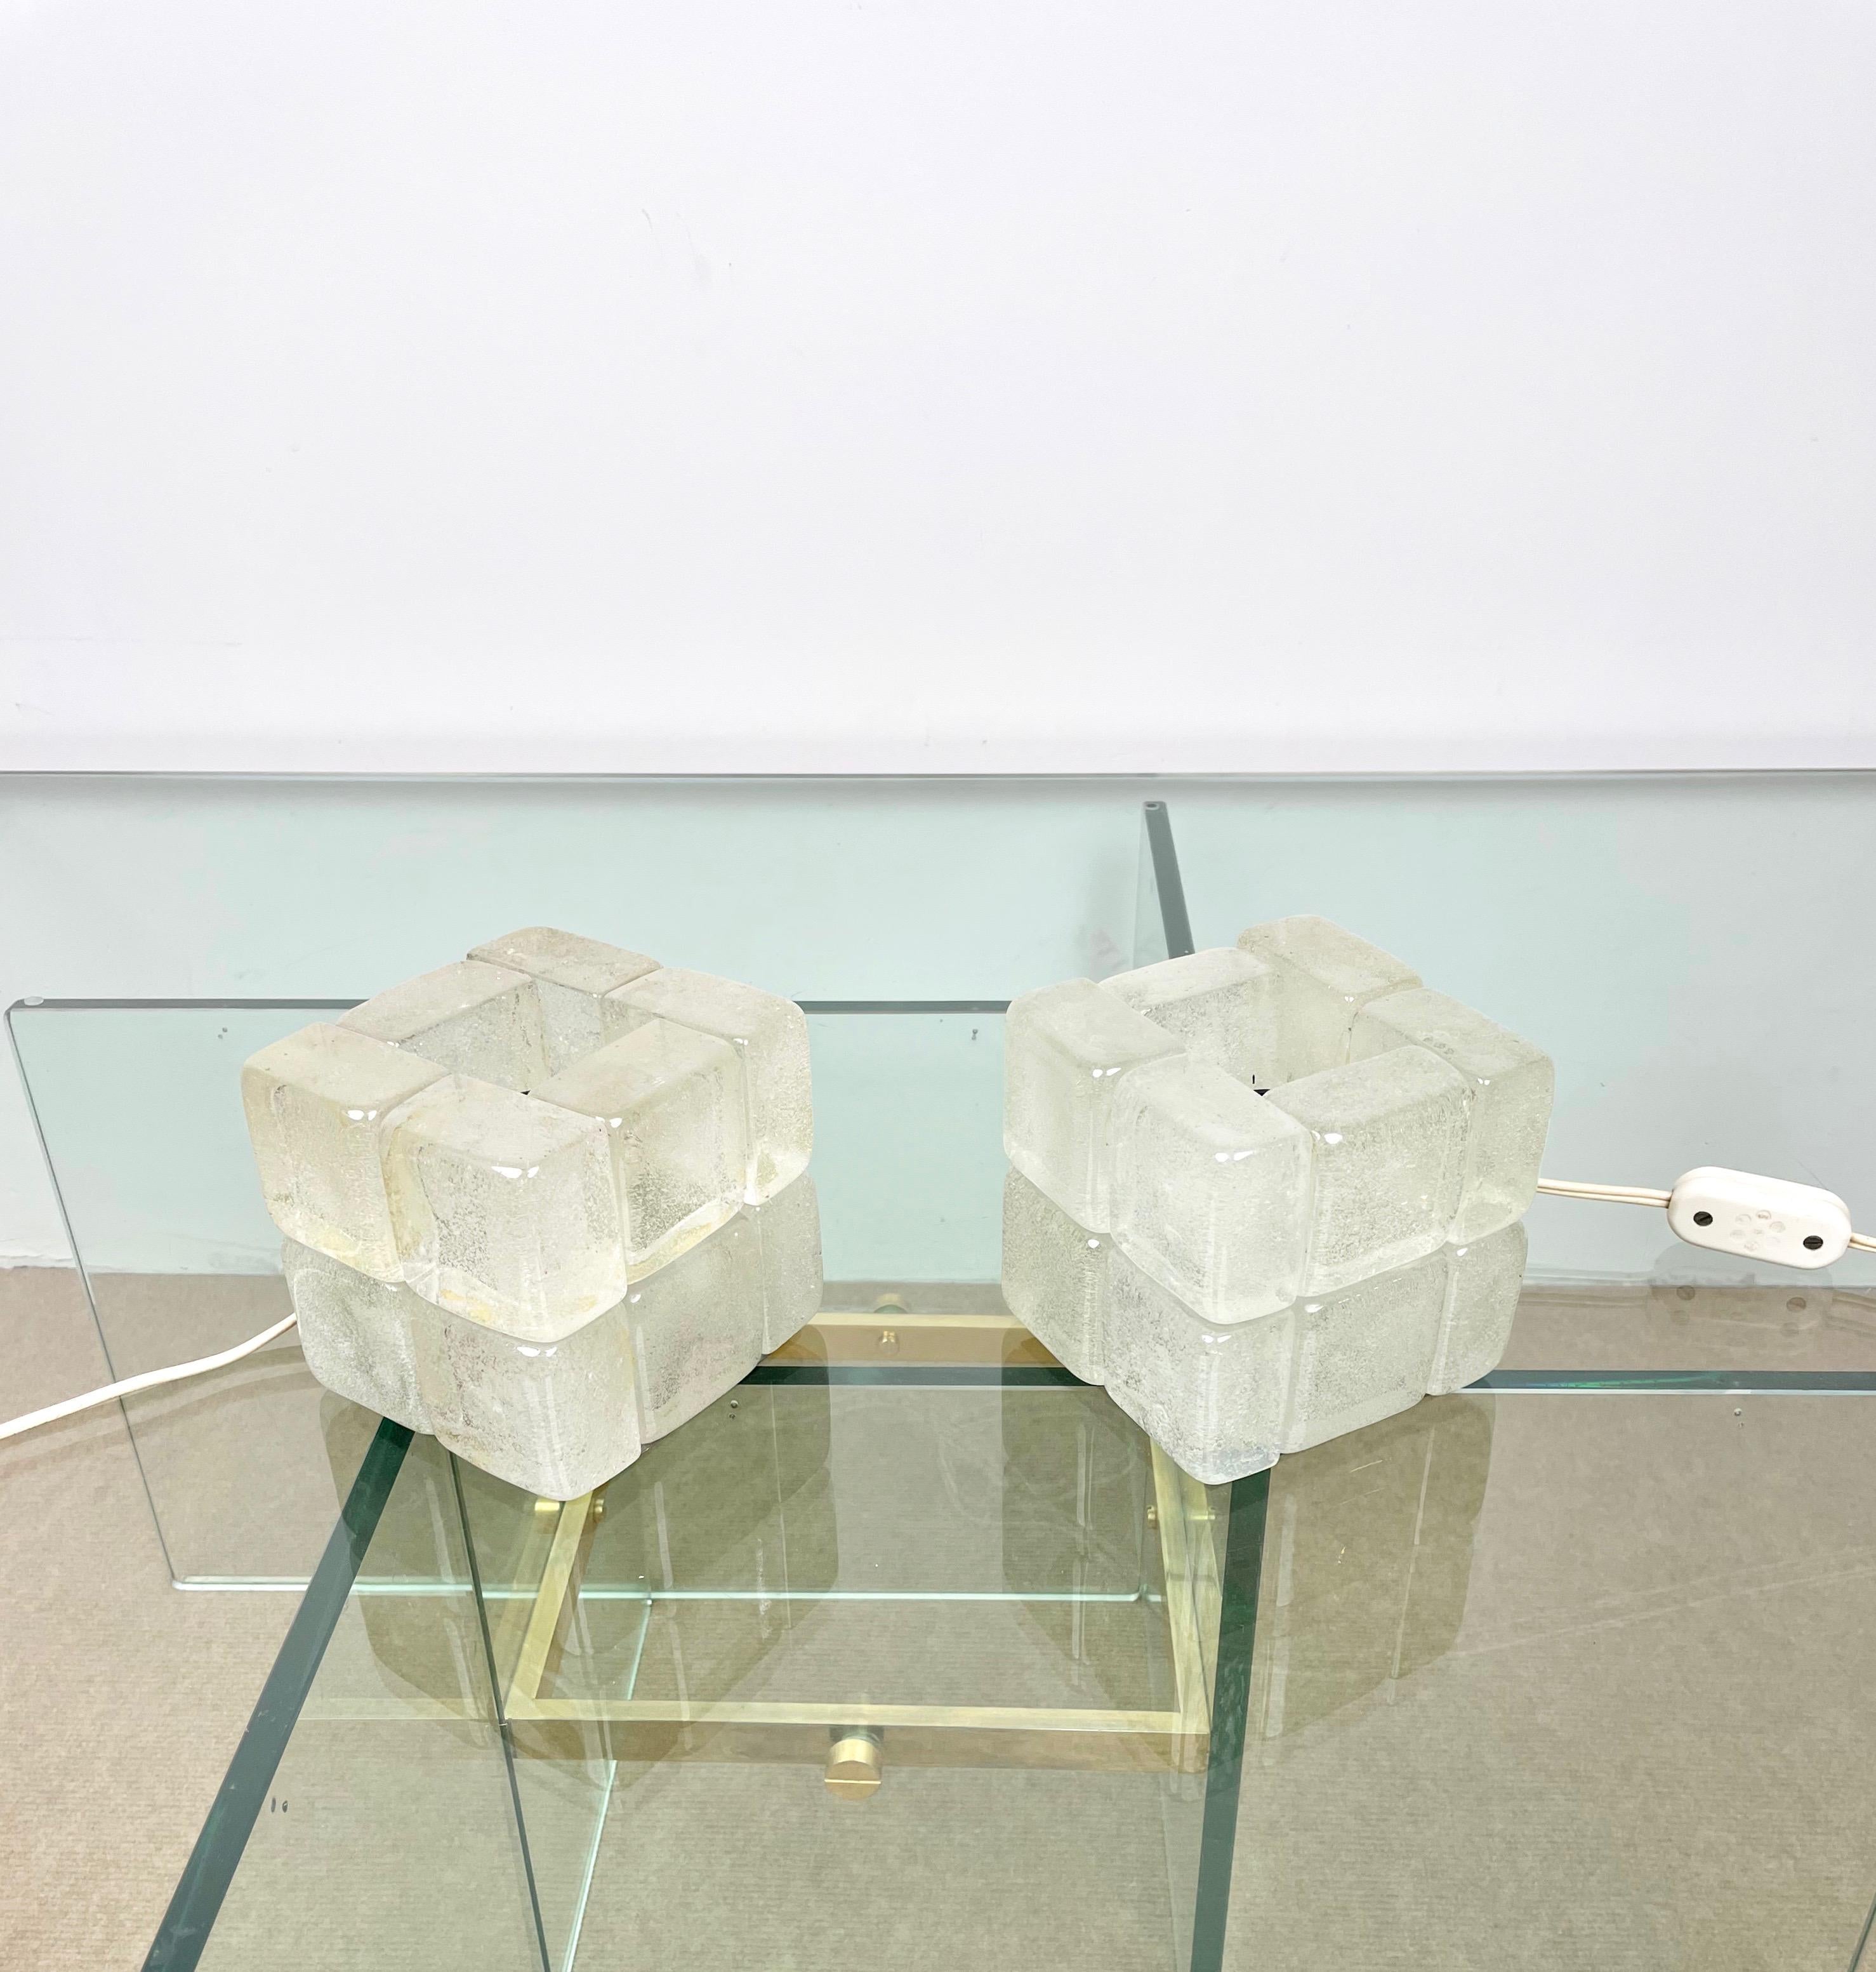 Pair of Murano Glass Cube Lamps by Albano Poli for Poliarte, Italy, 1970s For Sale 5